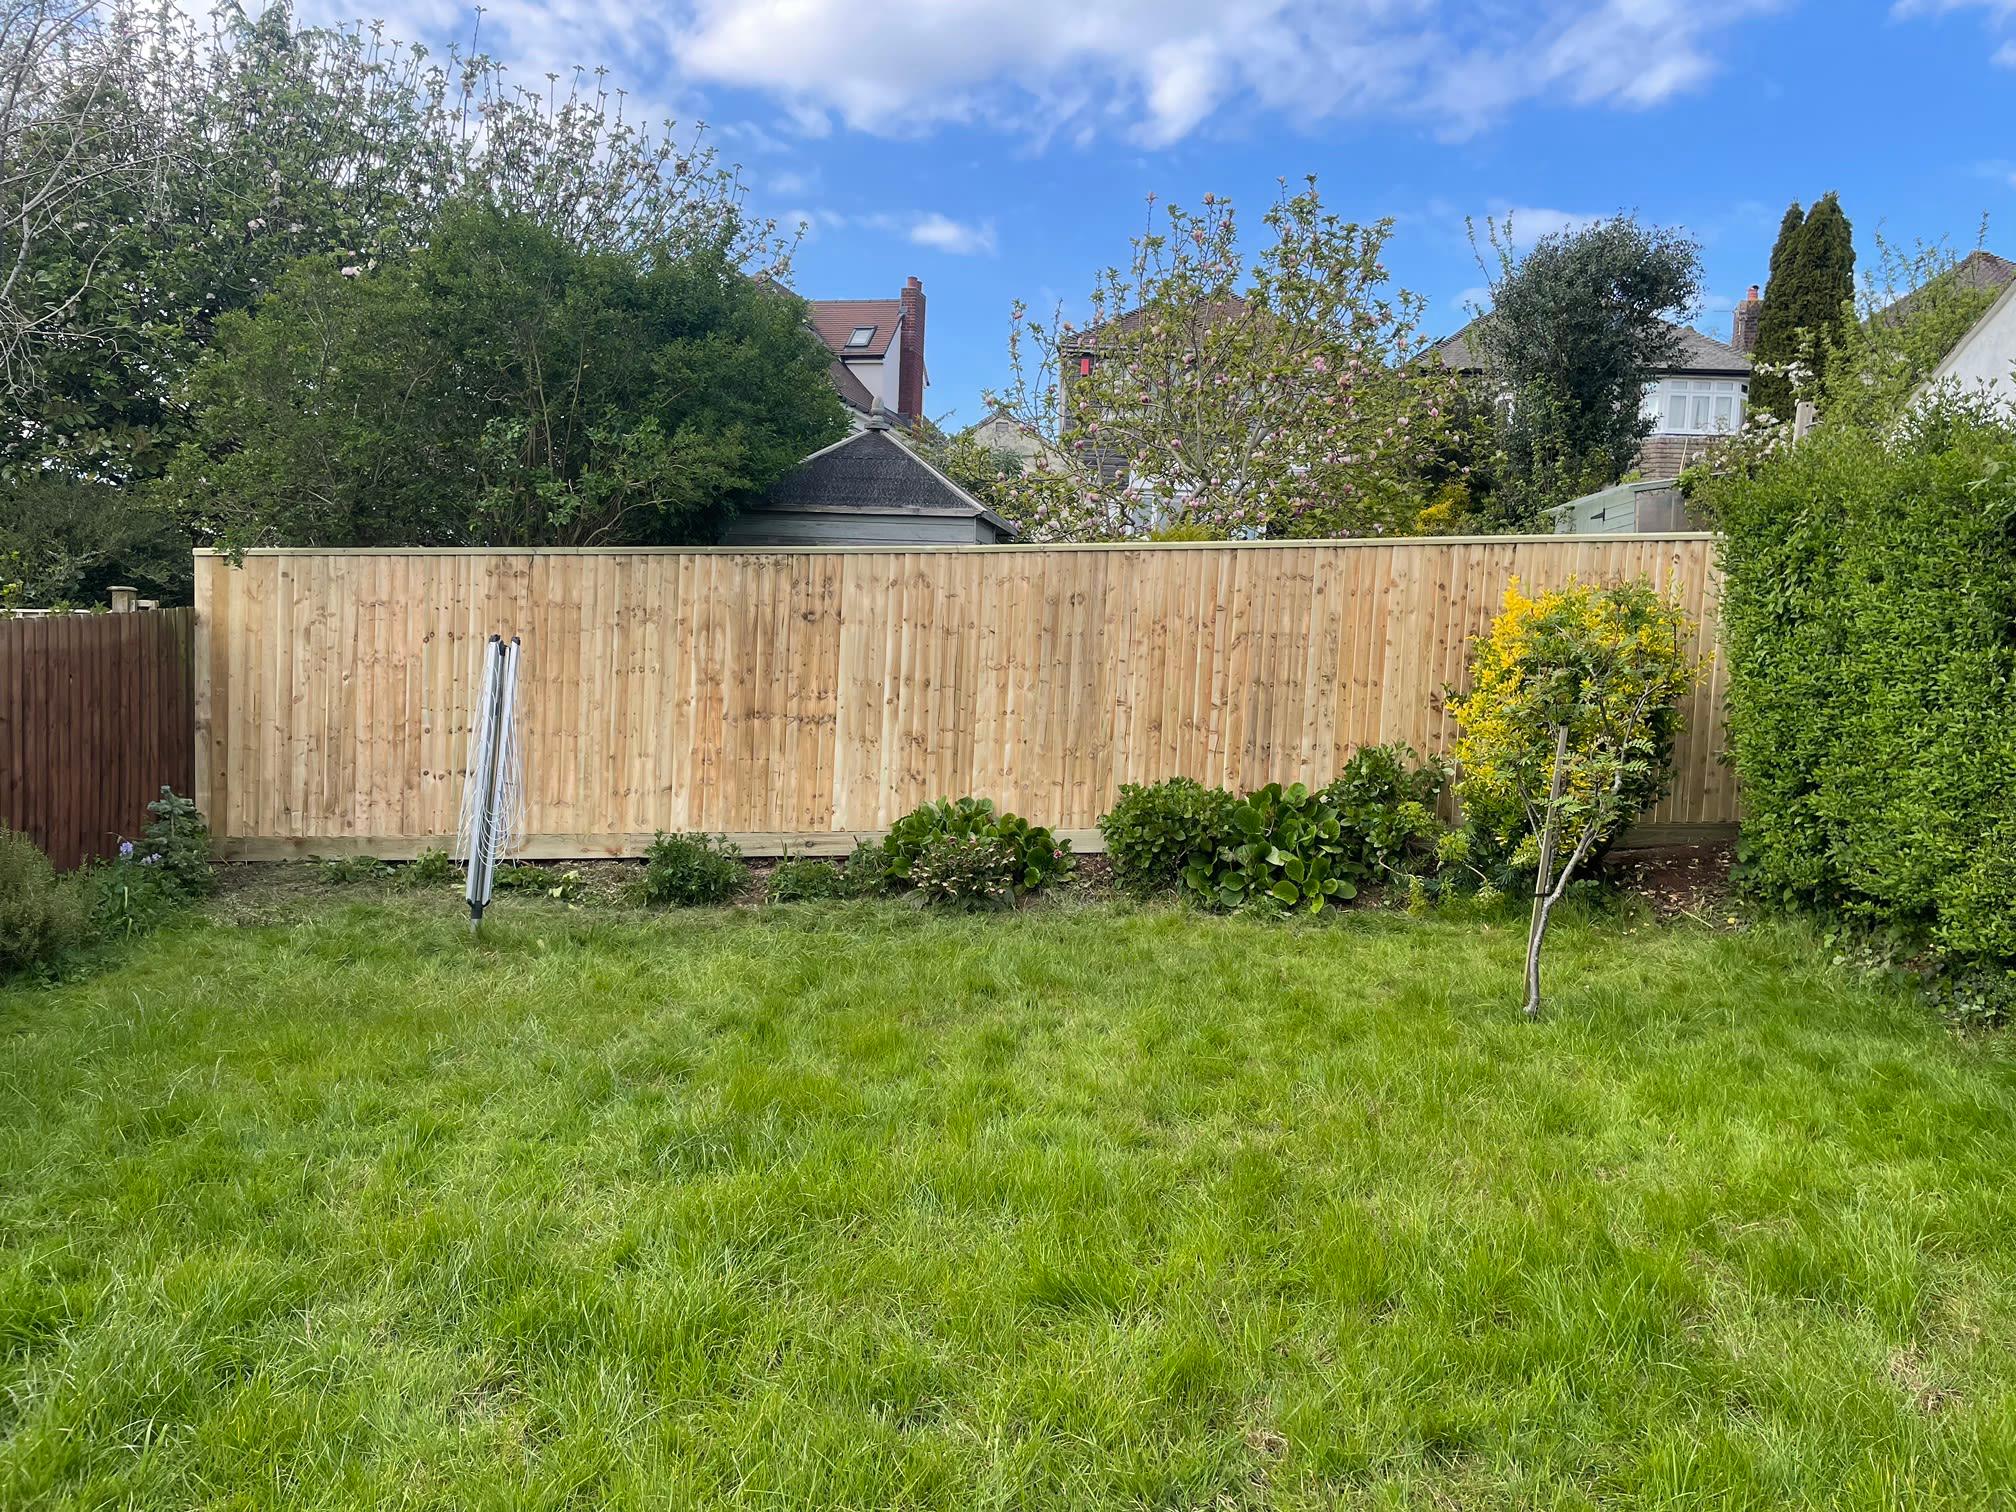 Images JH Fencing Tree & Garden Services